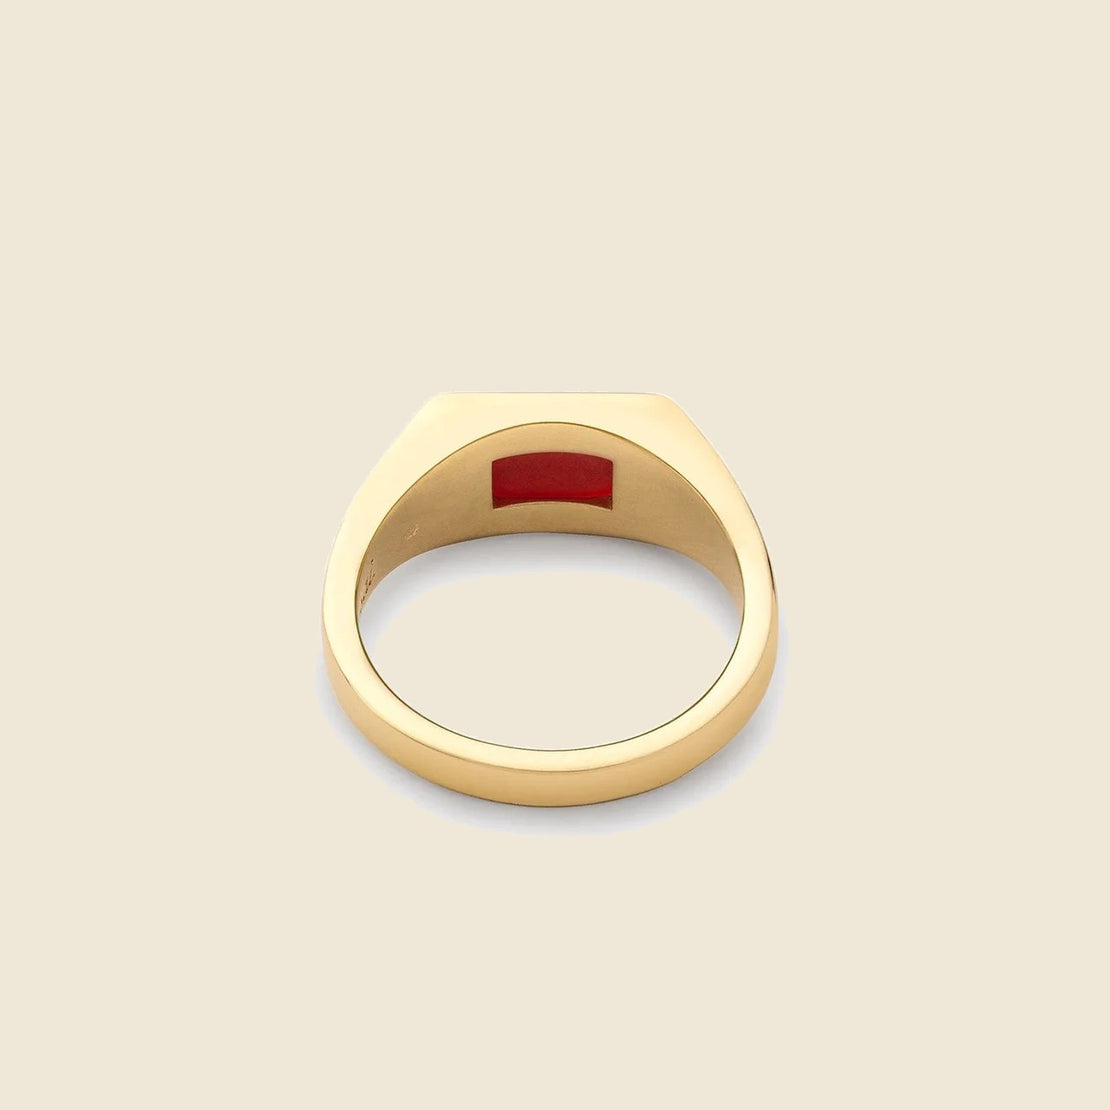 Slim Lennox Ring - Gold Vermeil/Polished Red Agate - Miansai - STAG Provisions - W - Accessories - Ring